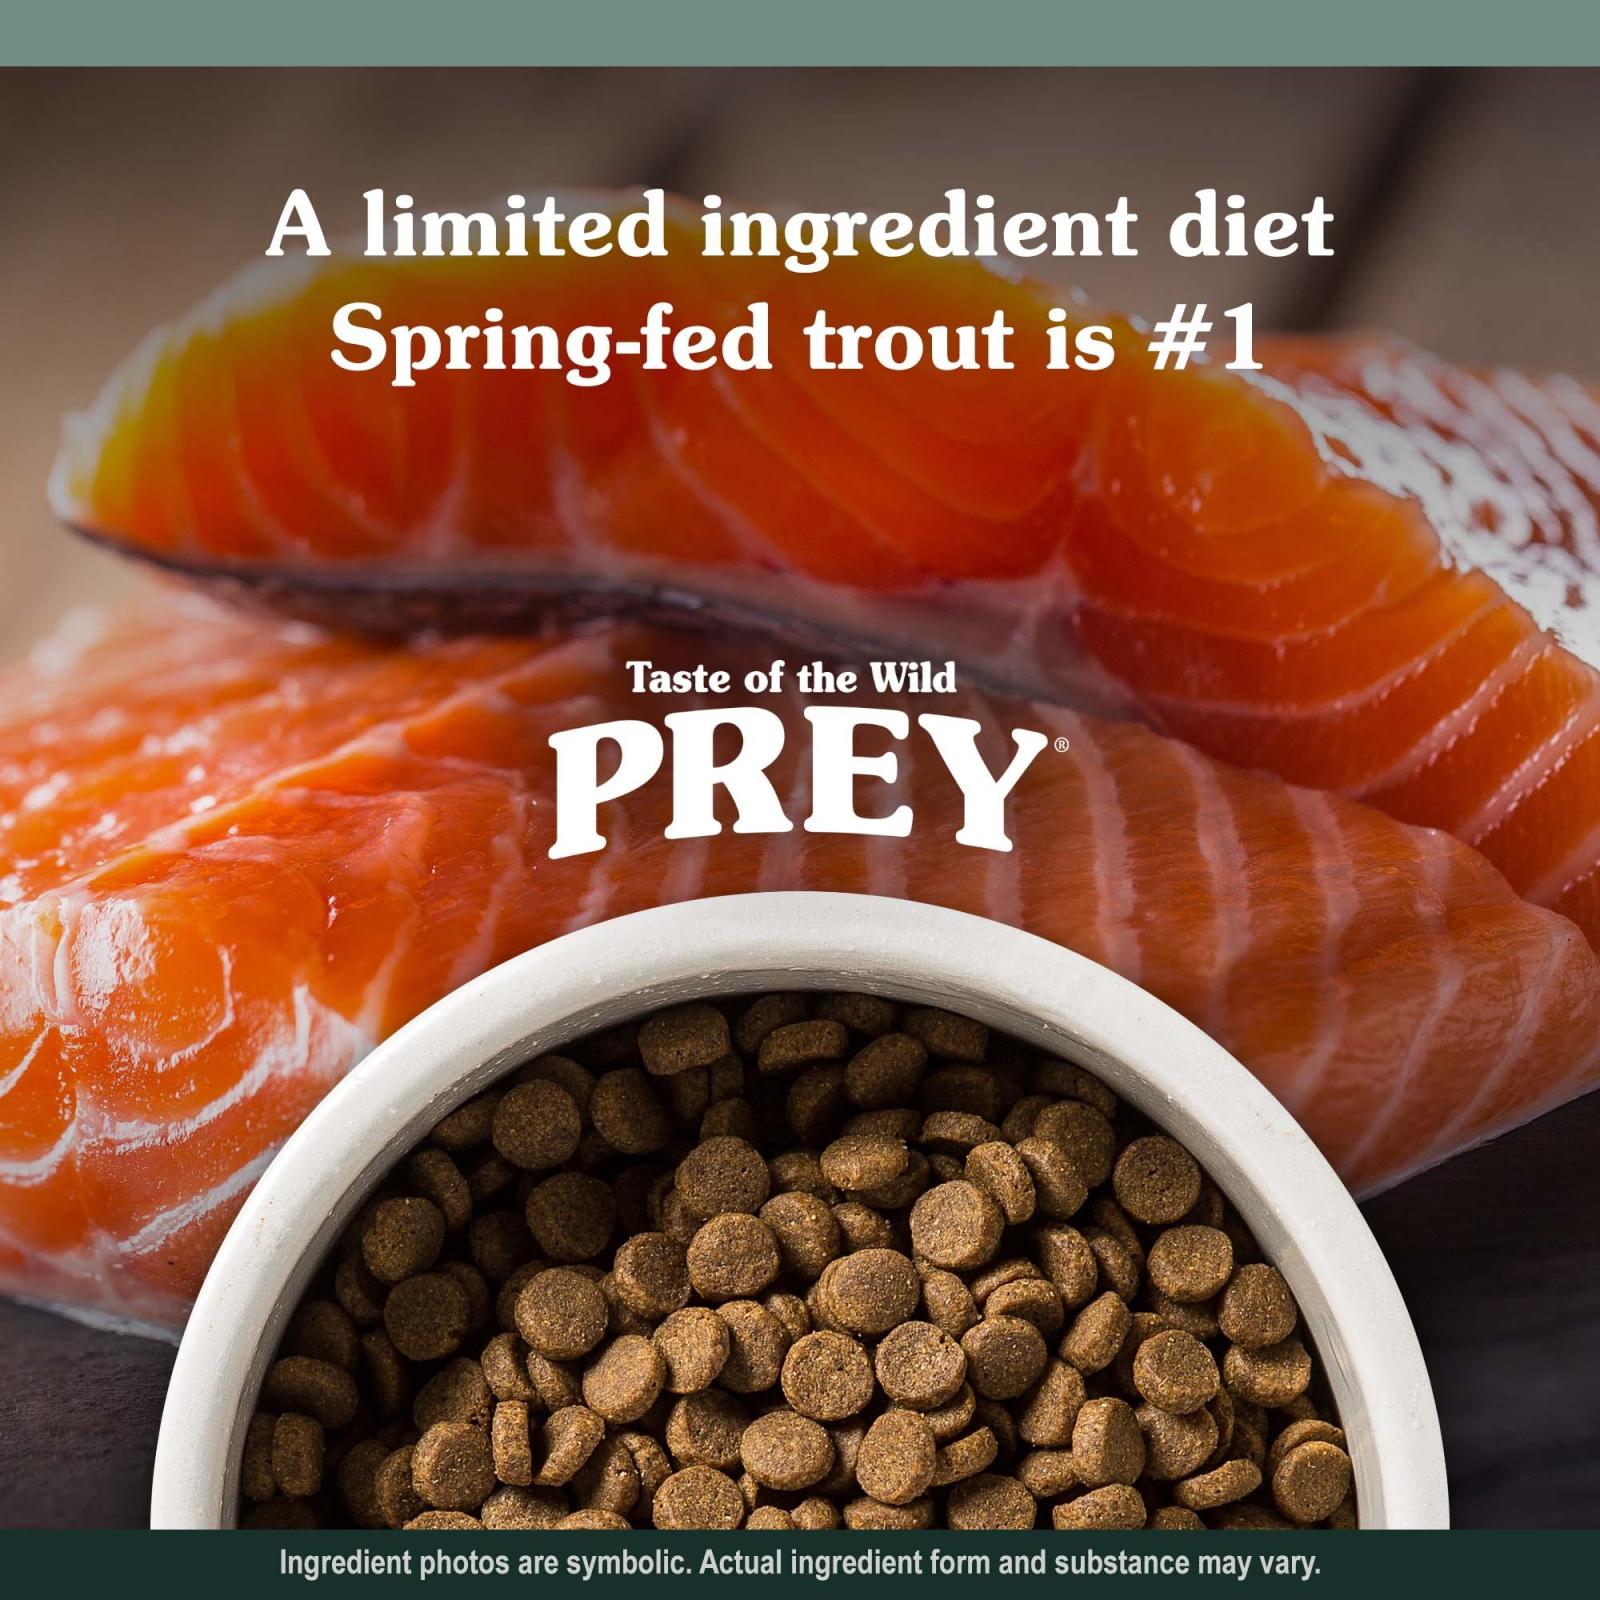 Taste of the Wild PREY Trout LID for Dogs